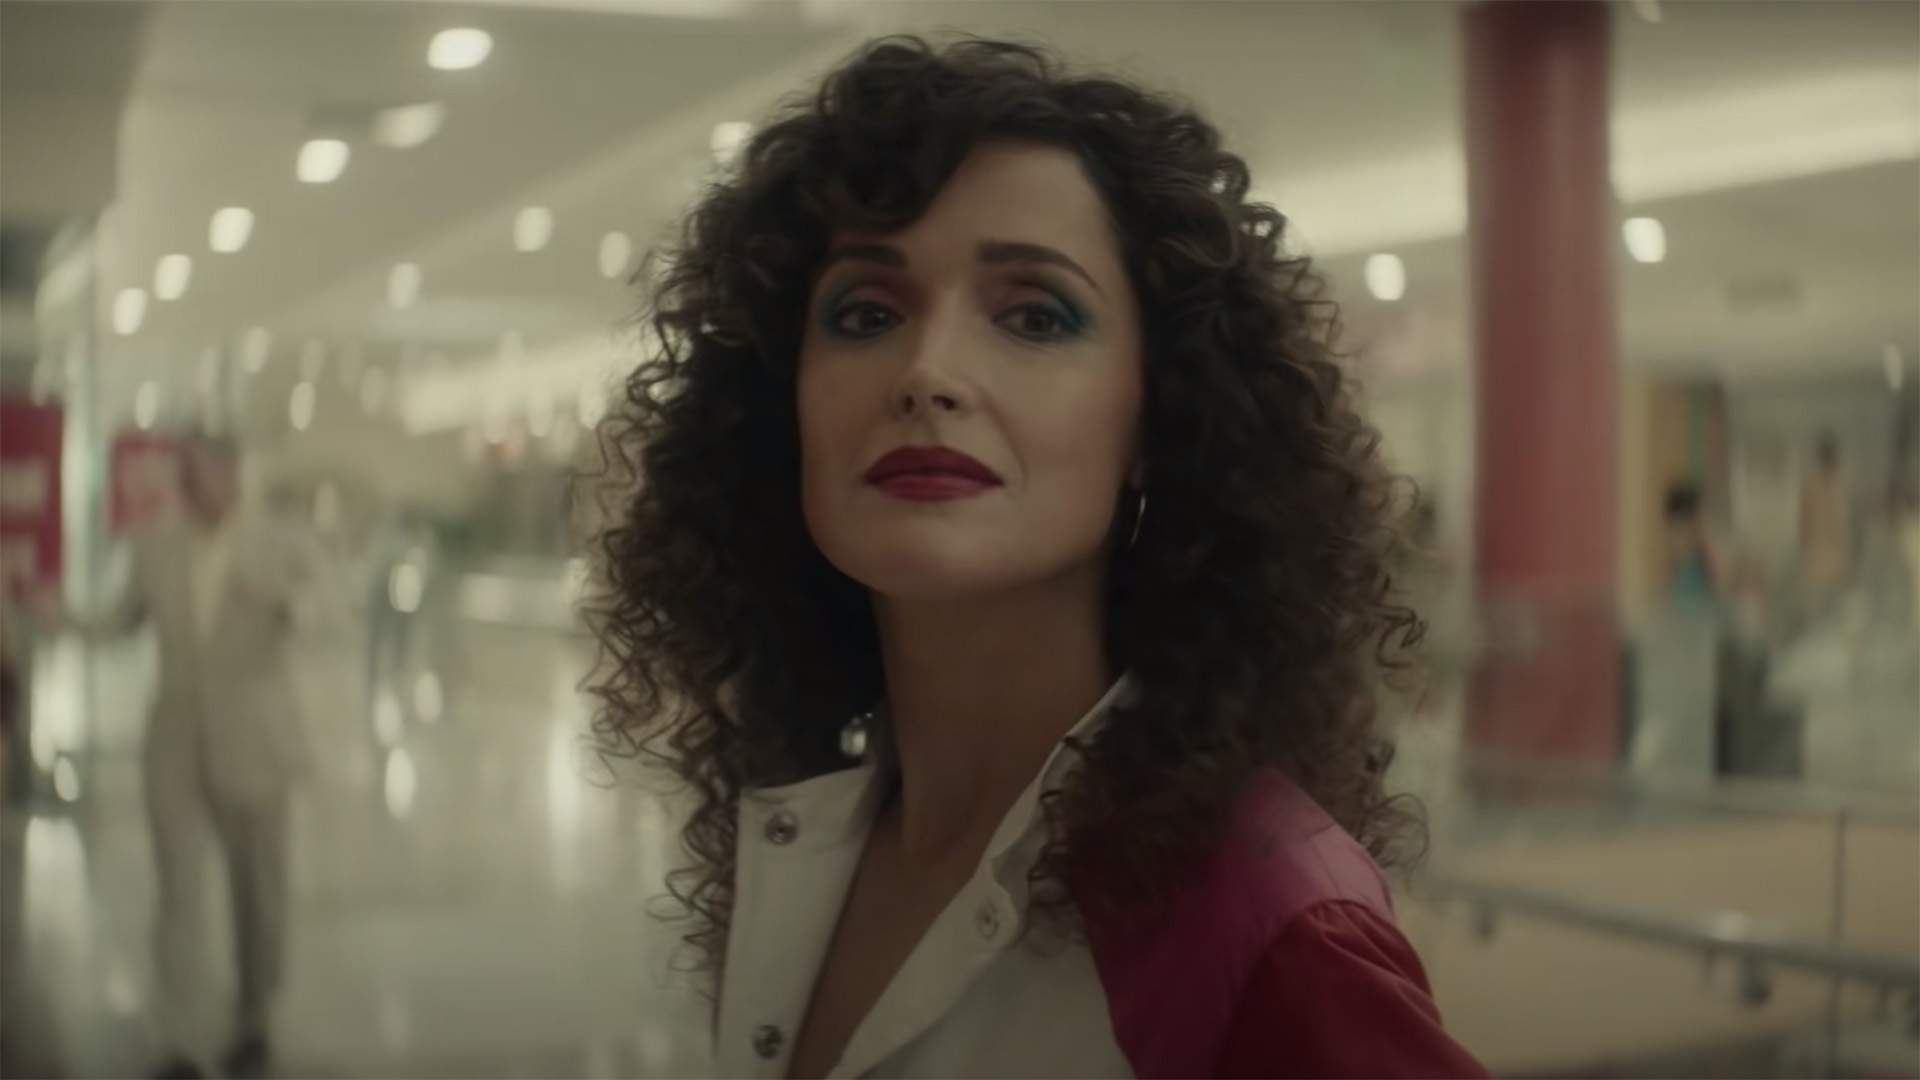 Rose Byrne Builds an Aerobics Empire in Apple TV+'s Supremely 80s New Dark Comedy 'Physical'